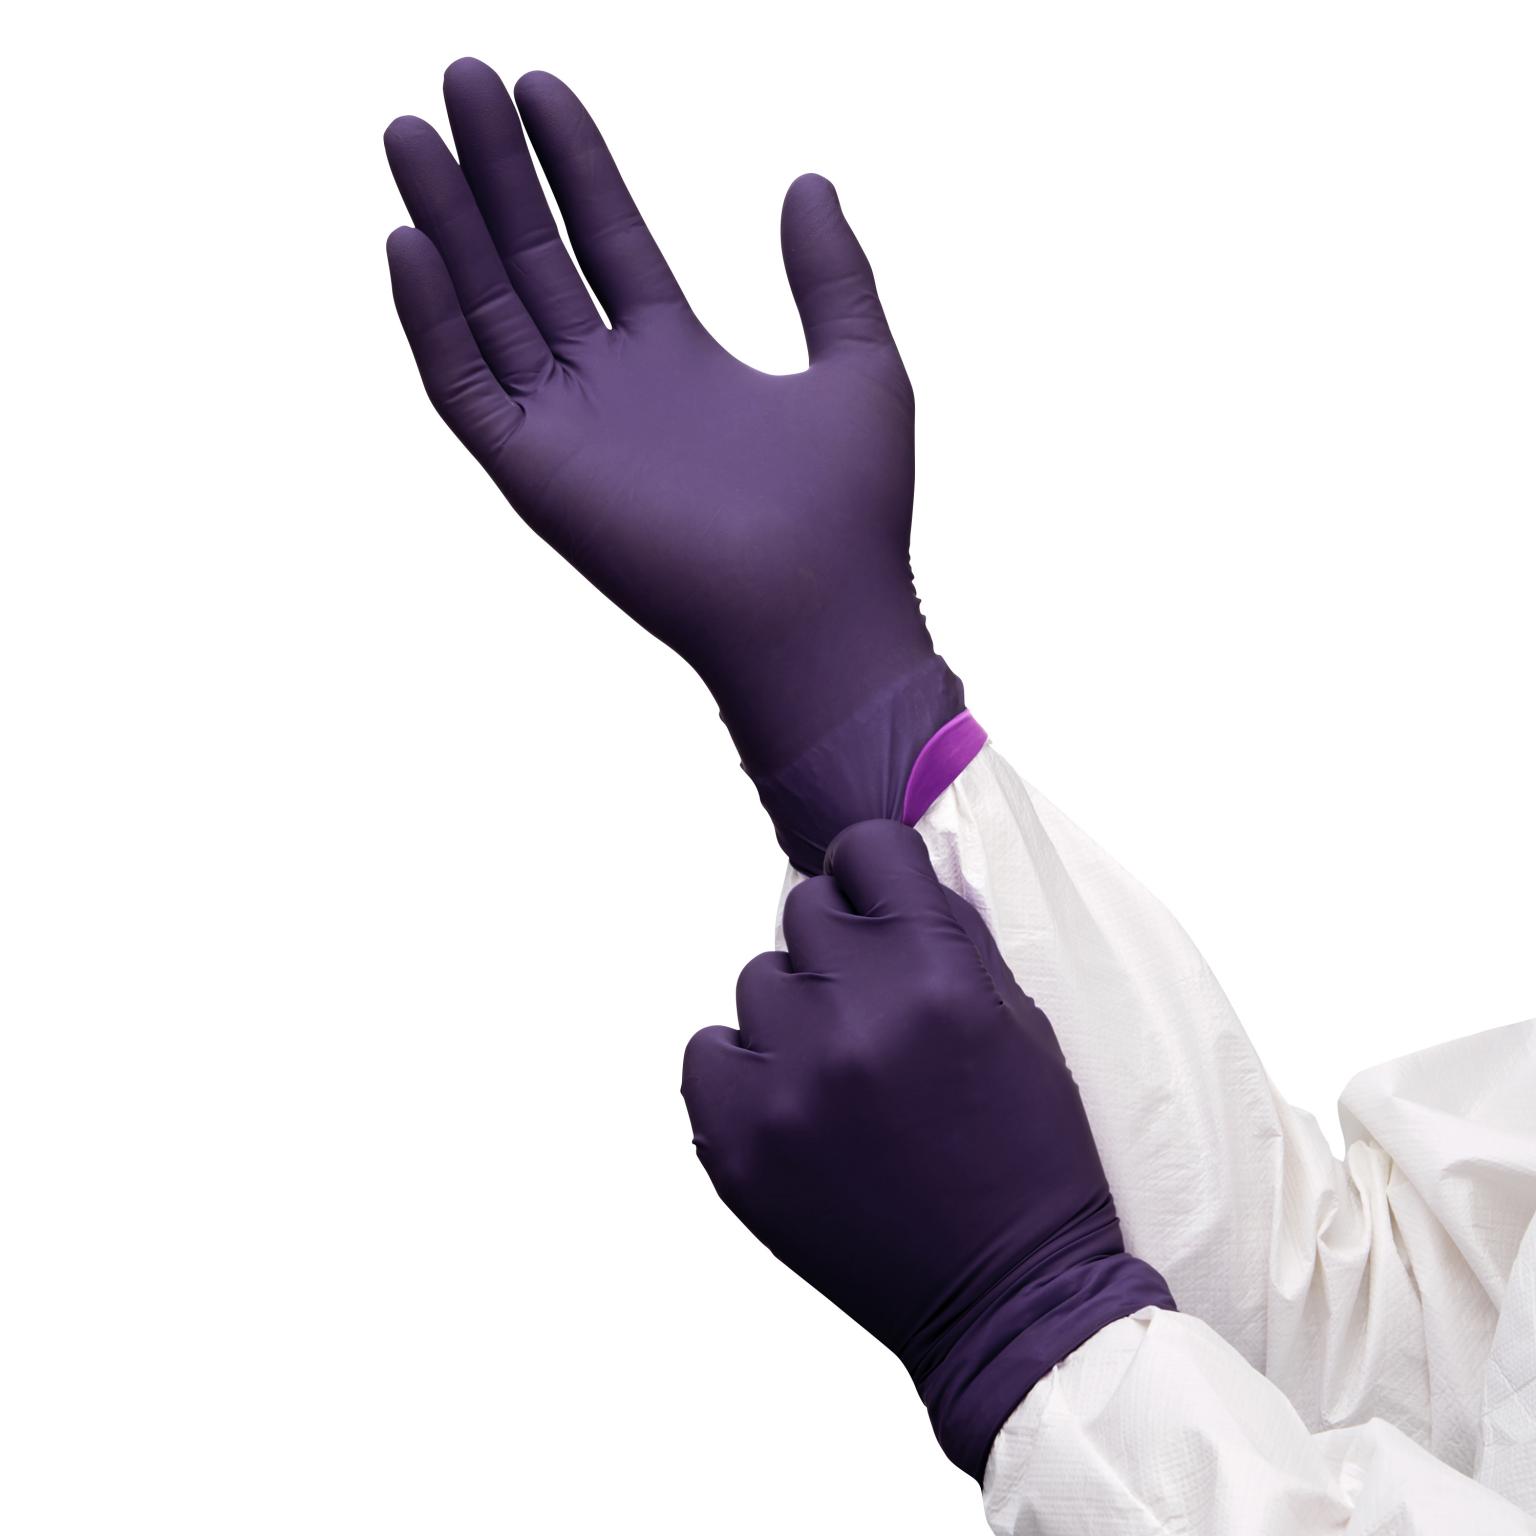 How to choose lab gloves | Scientist Live